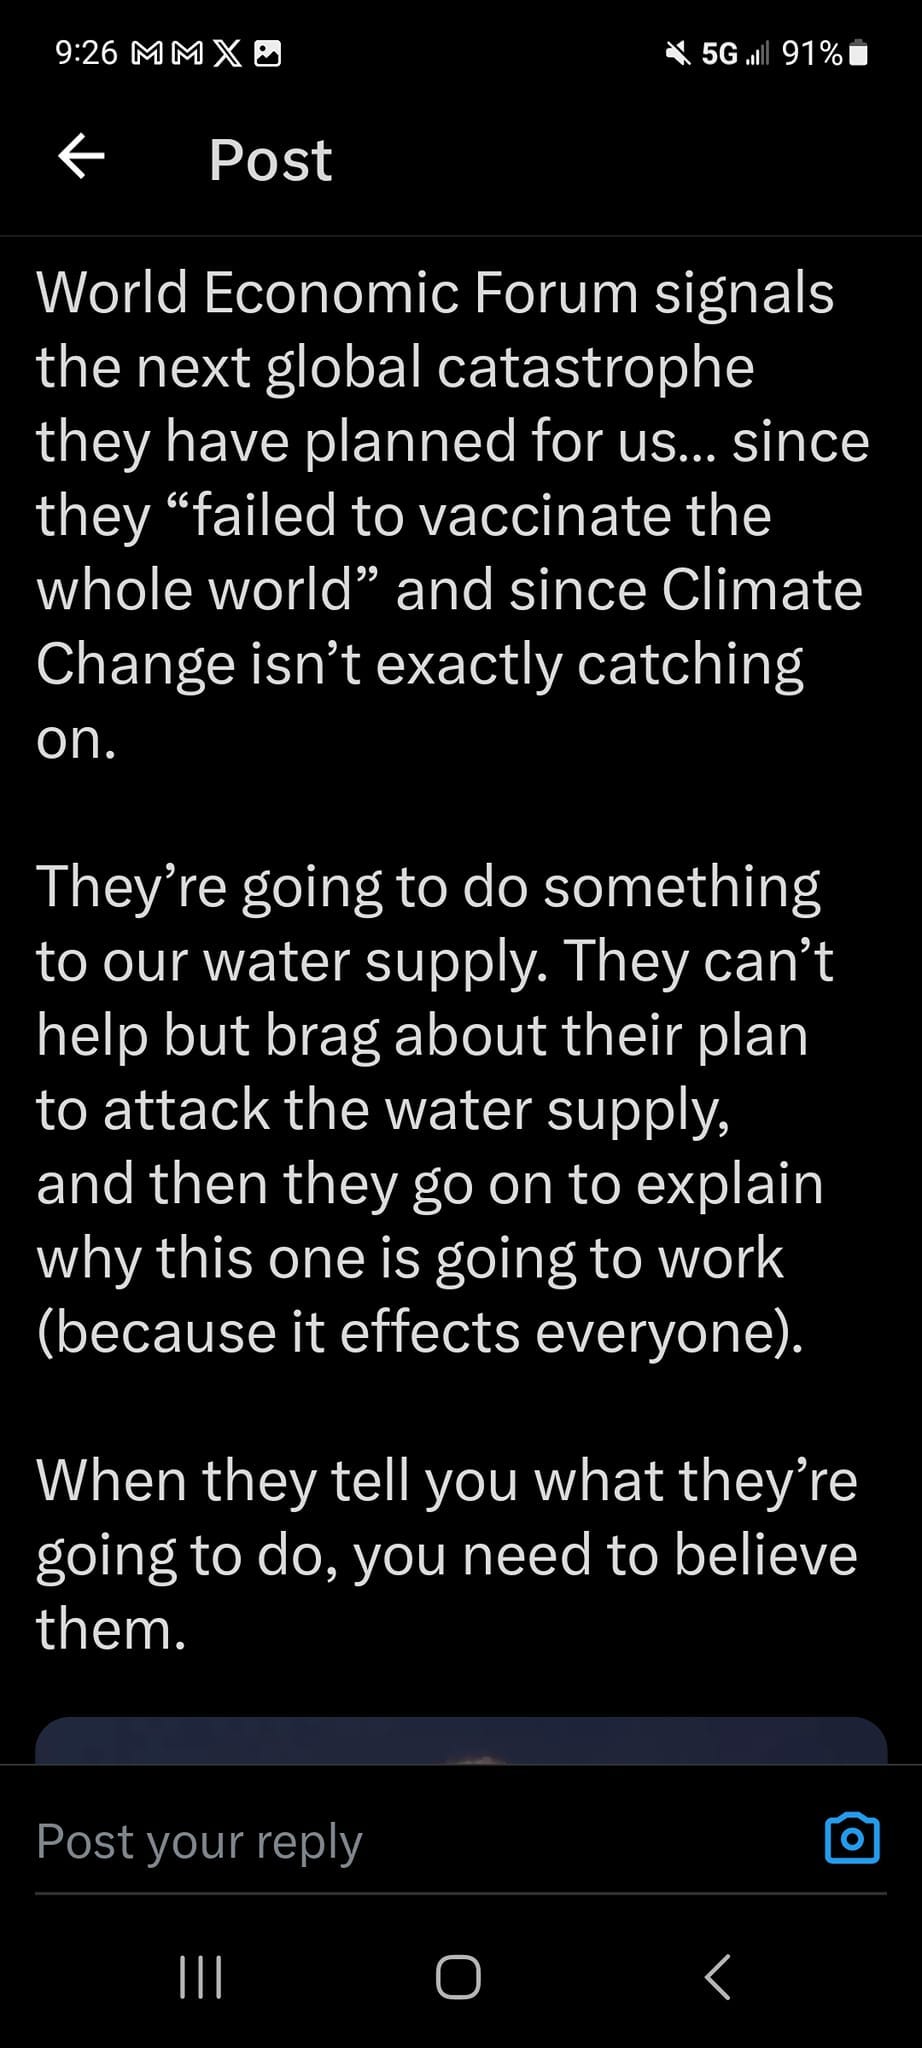 May be an image of text that says '9:26 MMX 91% Post World Economic Forum signals the next global catastrophe they have planned for us... since they "failed to vaccinate the whole world" and since Climate Change isn't exactly catching on. They're going to do something to our water supply. They can't help but brag about their plan to attack the water supply, and then they go on to explain why this one is going to work Ûecae it effects everyone). When they tell you what they're going to do, you need to believe them. Post your rep'